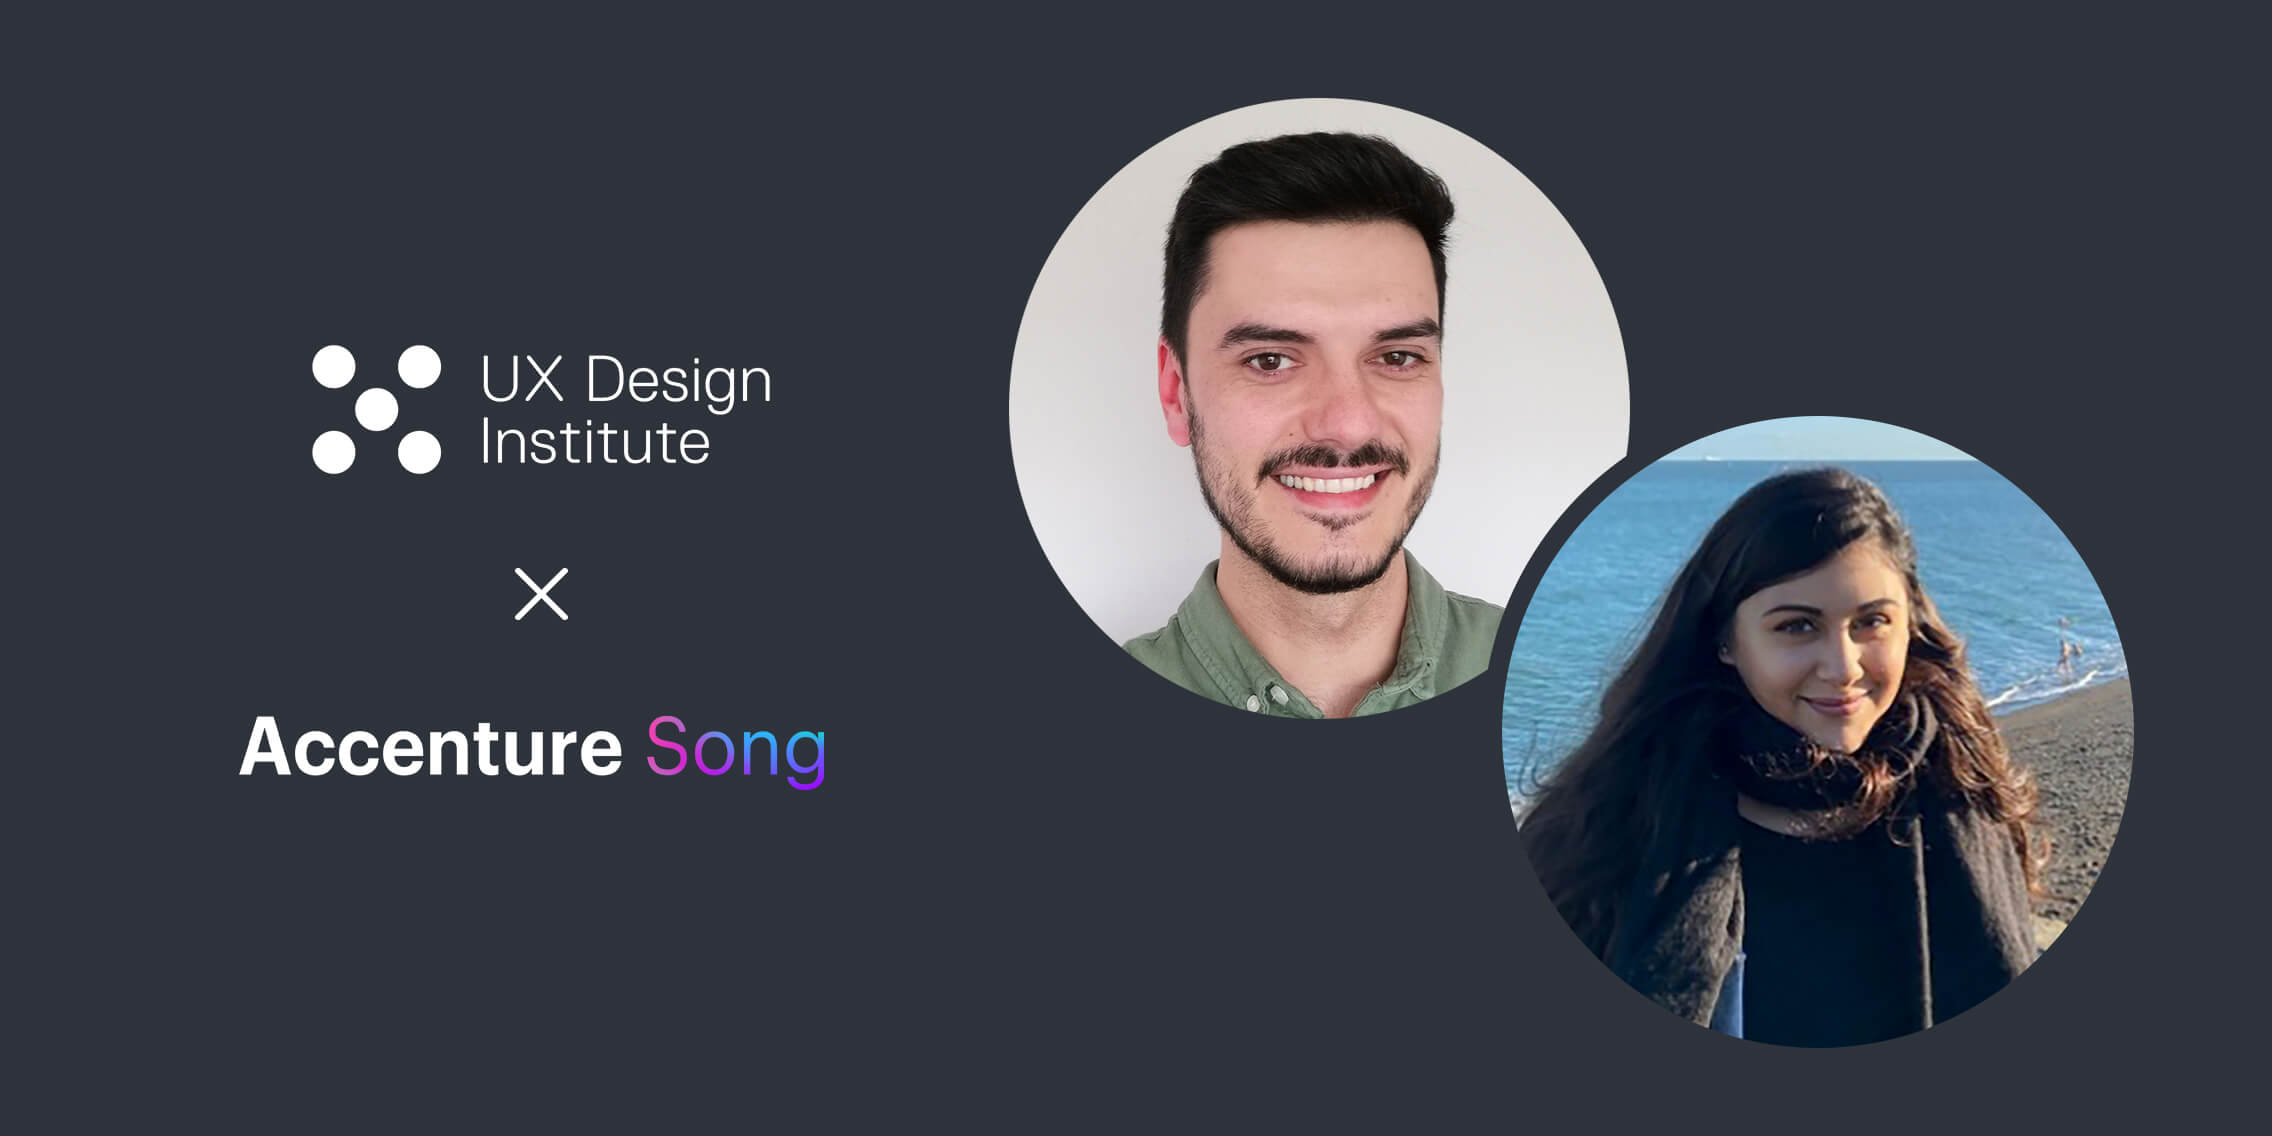 Meet the UX Design Institute and Accenture Song Interns